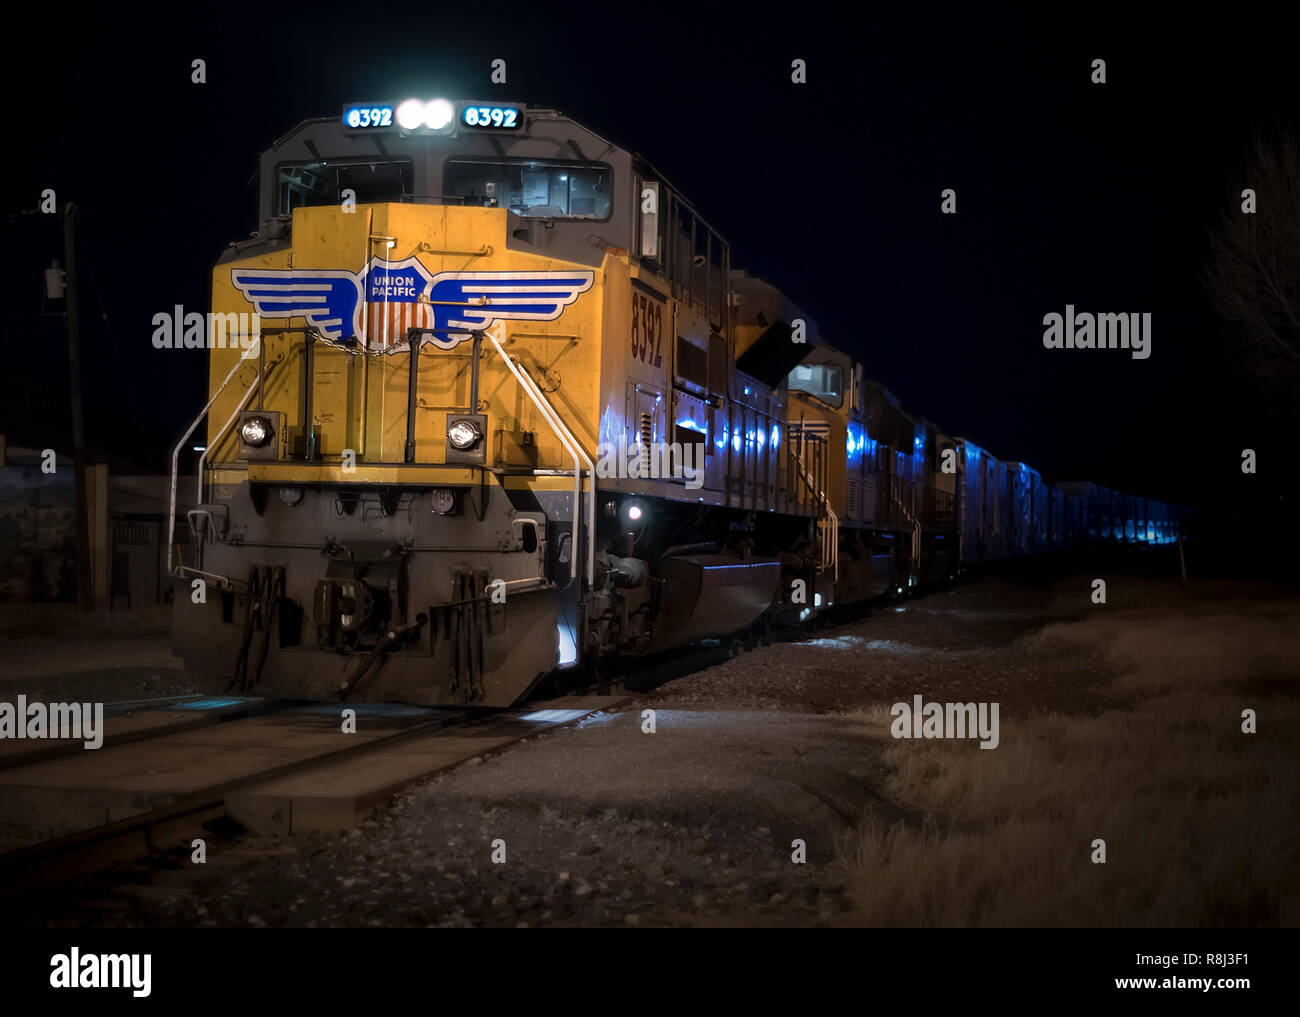 Union Pacific freight train going through Alpine, a small town situated in far west Texas. Stock Photo